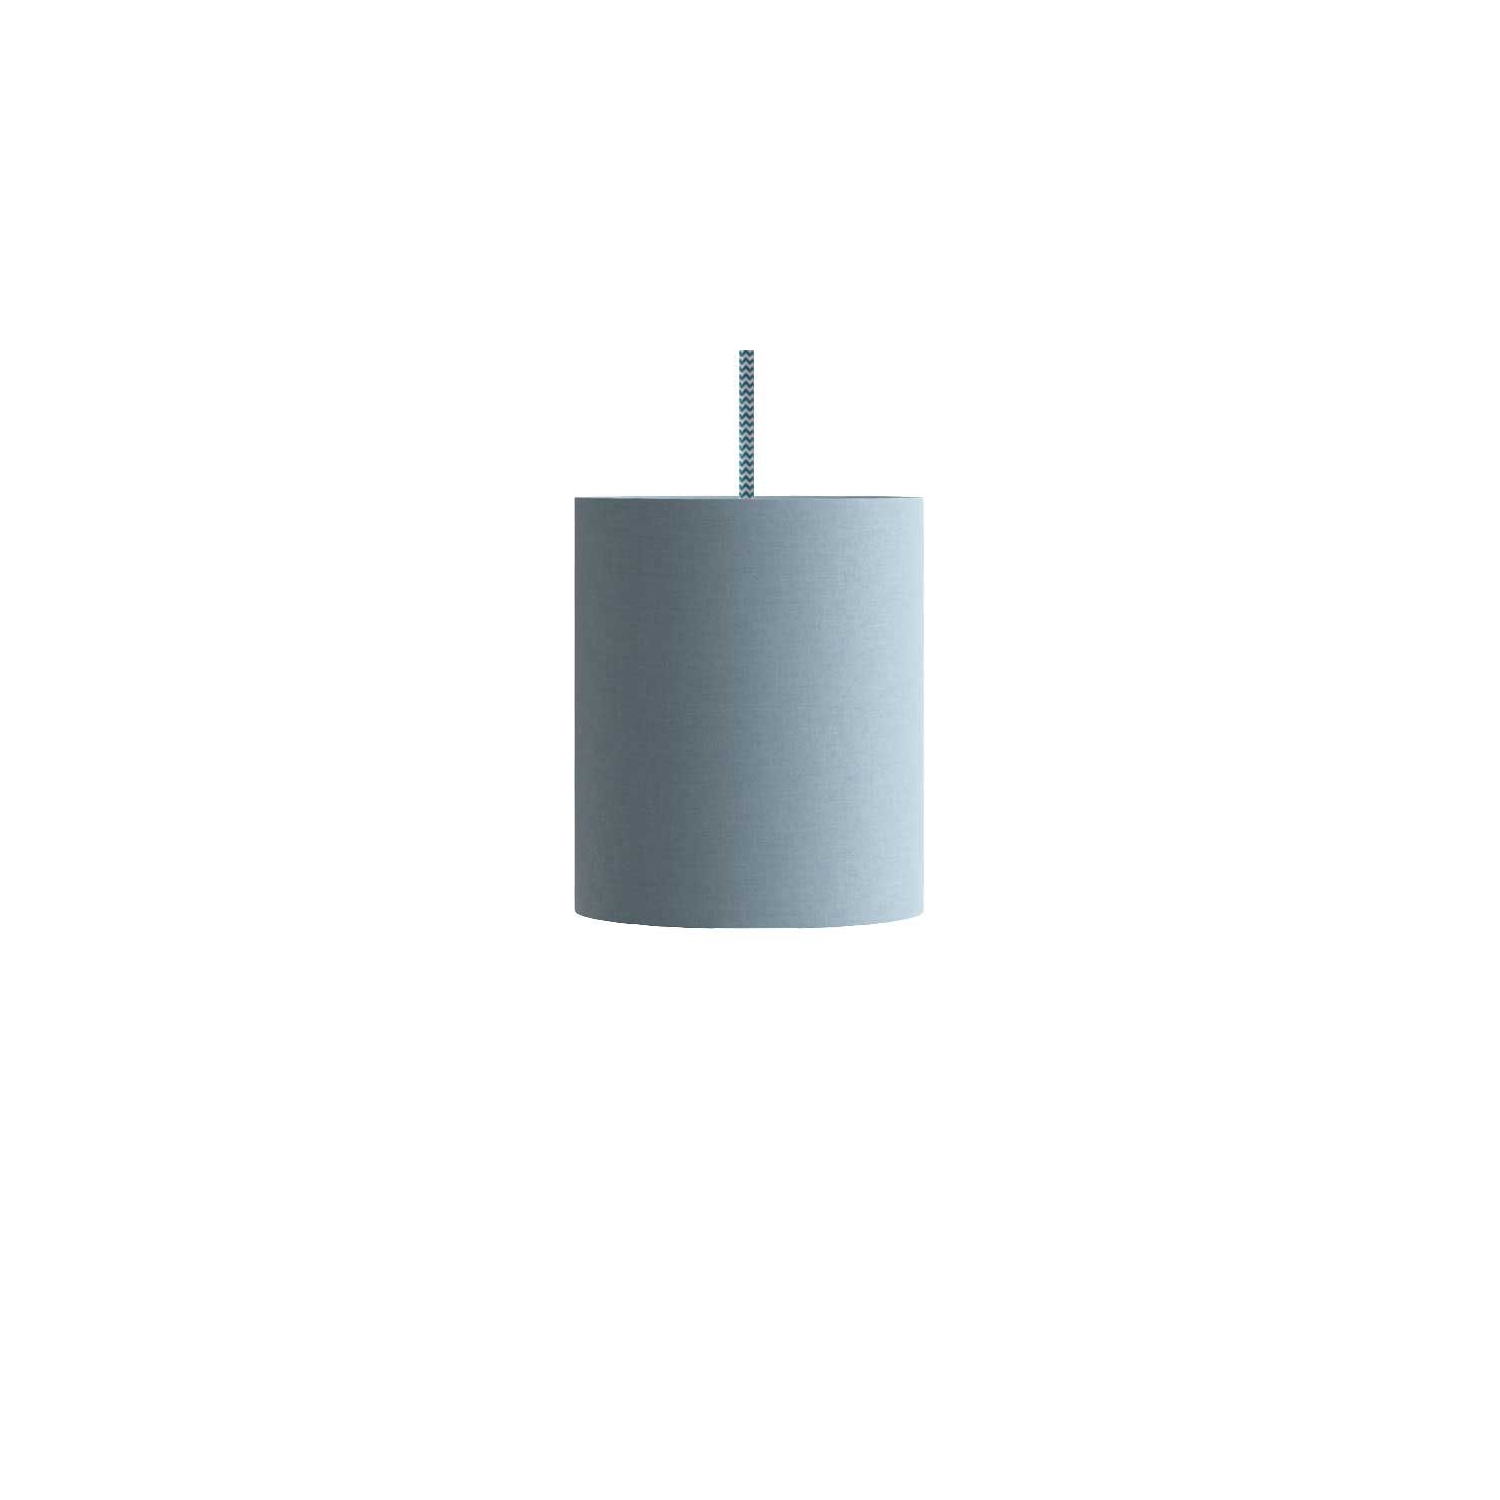 Pendant lamp with textile cable, Cylinder fabric lampshade and metal details